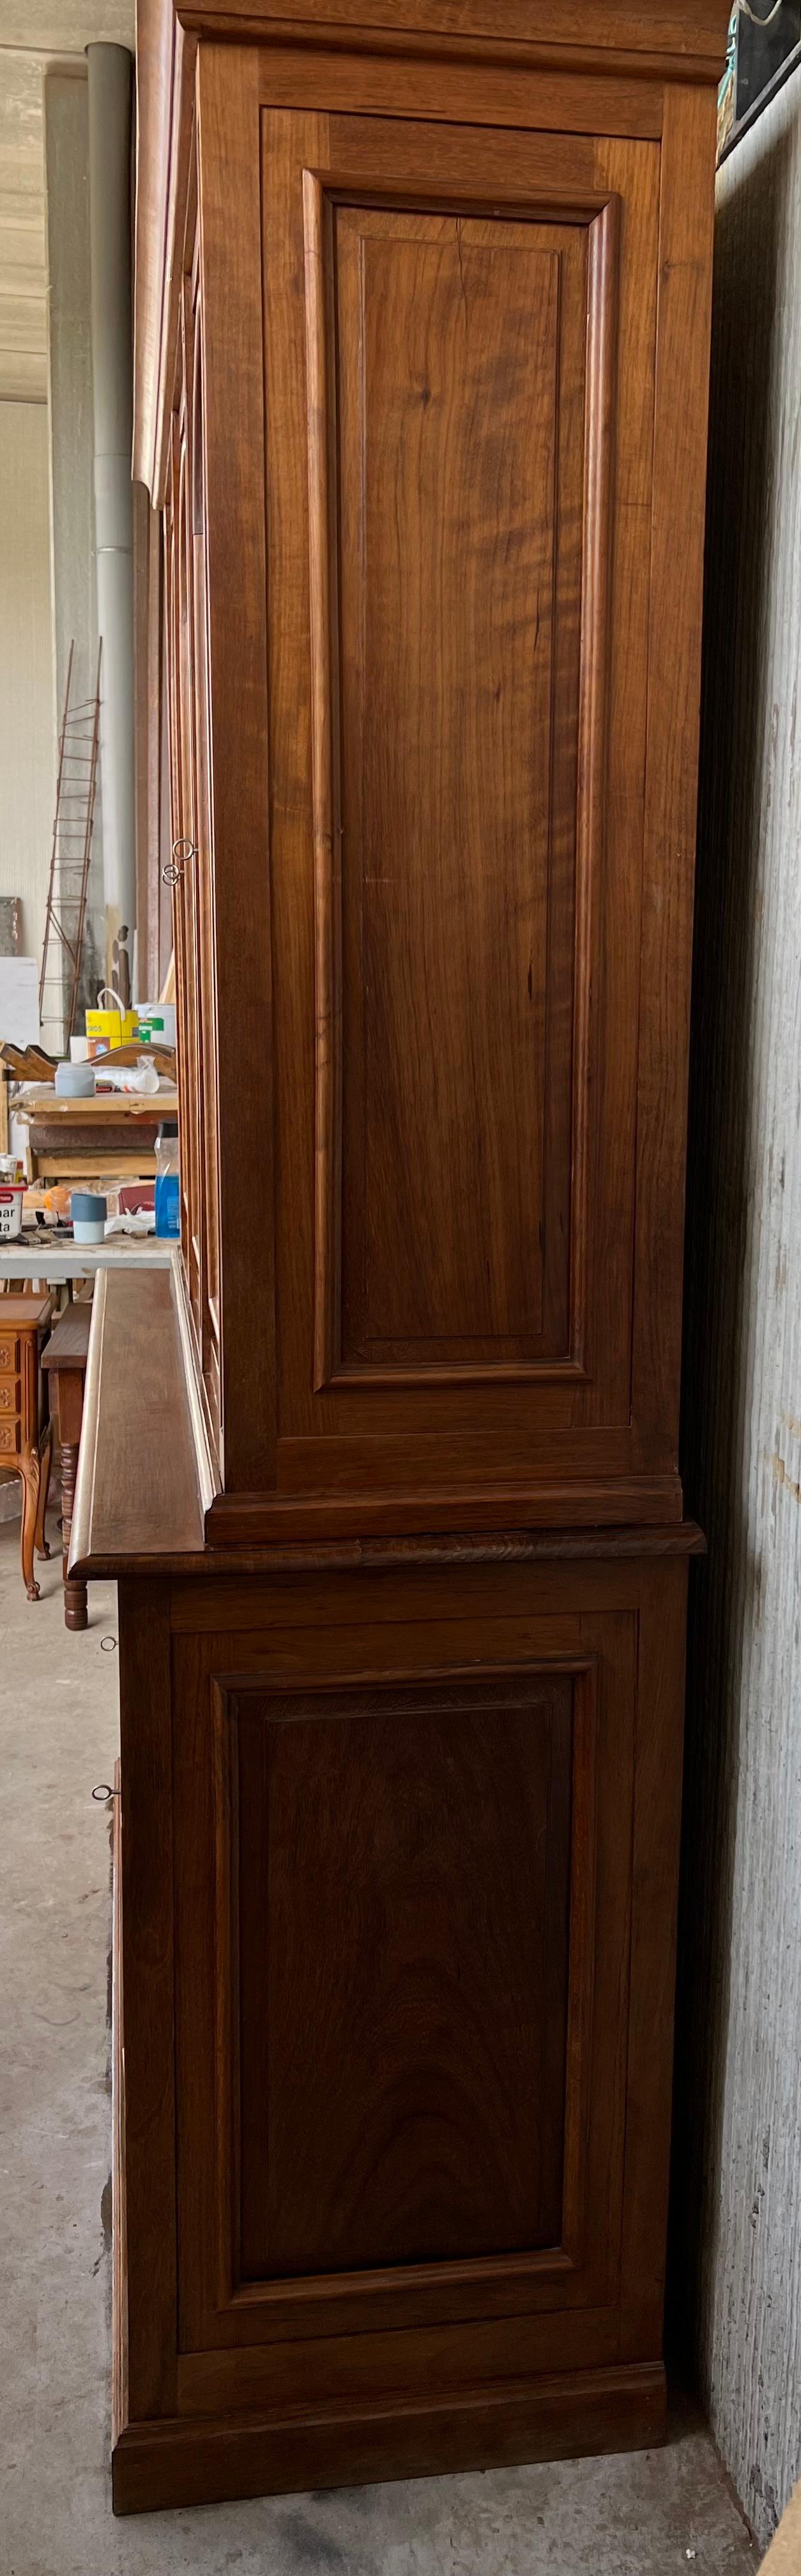 Early 20th Bookcase or Vitrine in Spanish Pine with Three Arch Glass Doors In Good Condition For Sale In Miami, FL